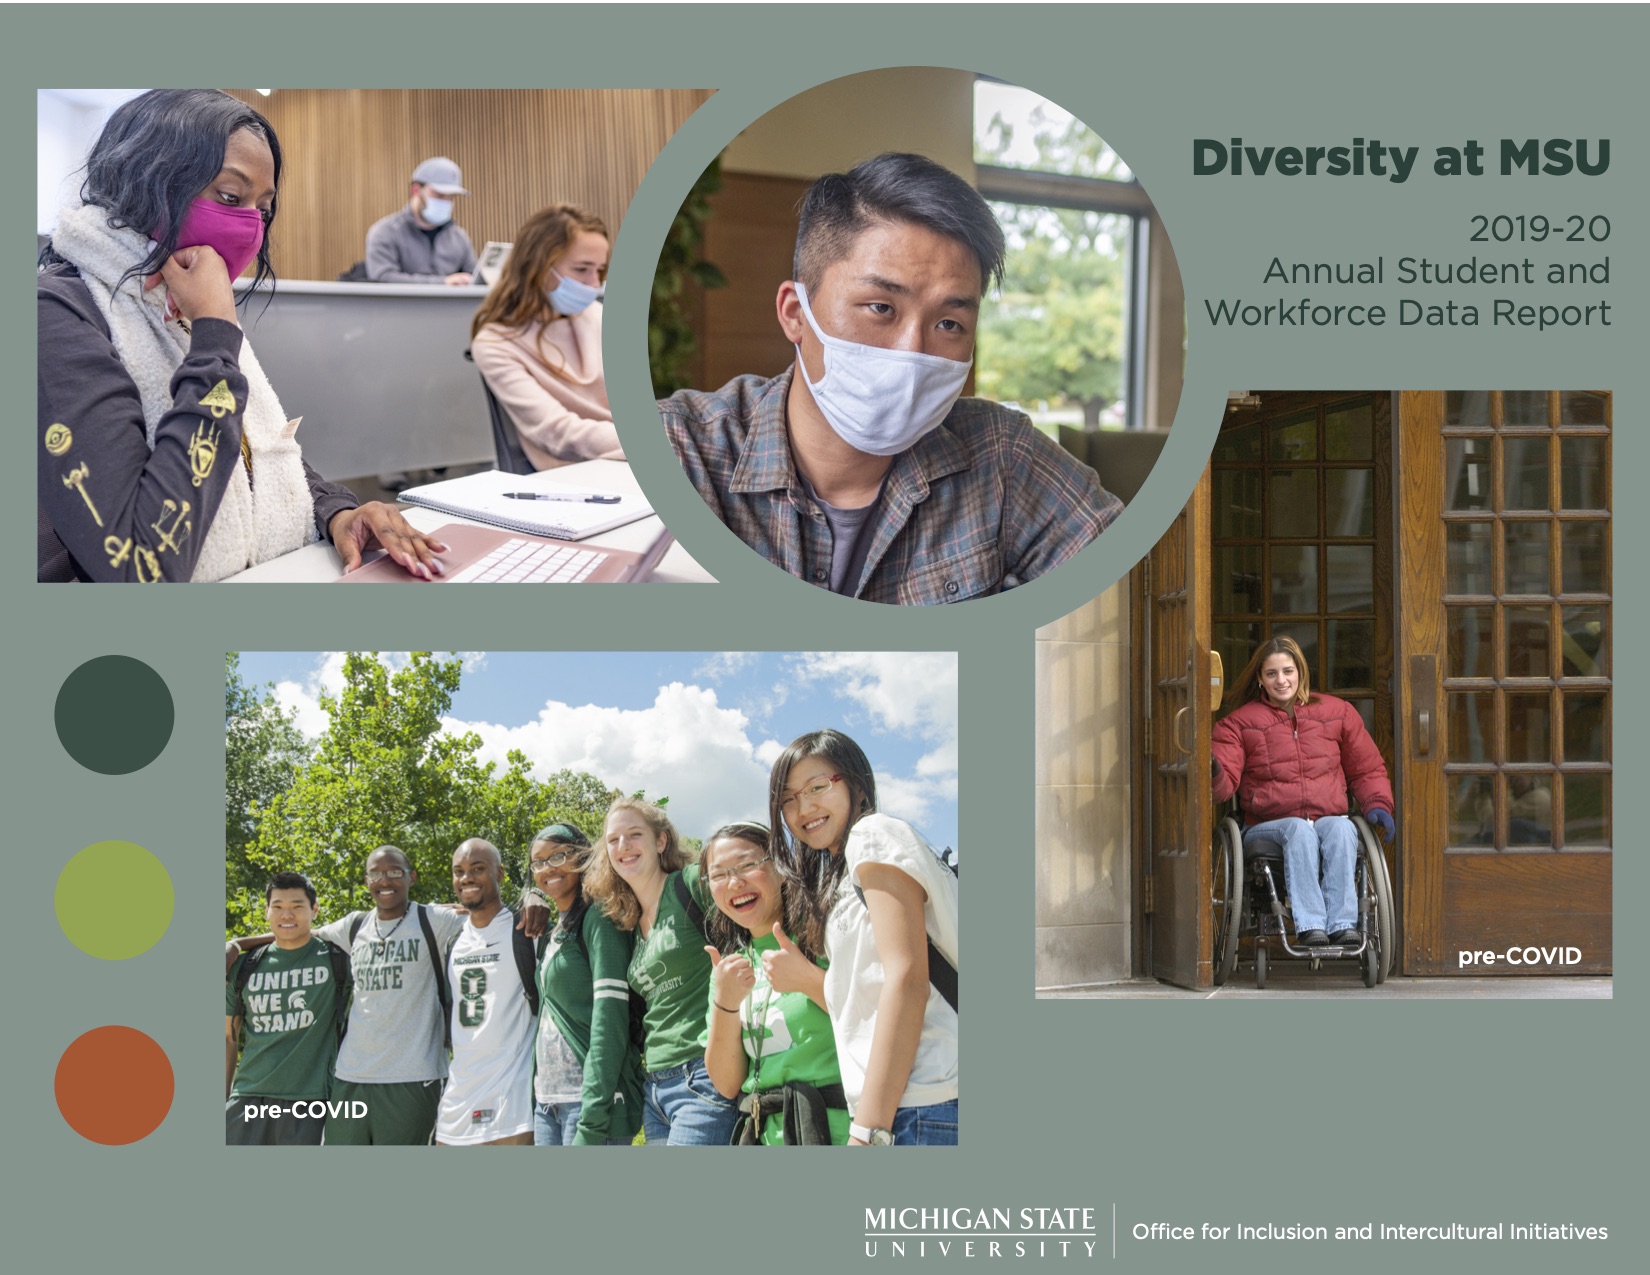 Diversity at MSU cover image featuring four photos of people on campus.